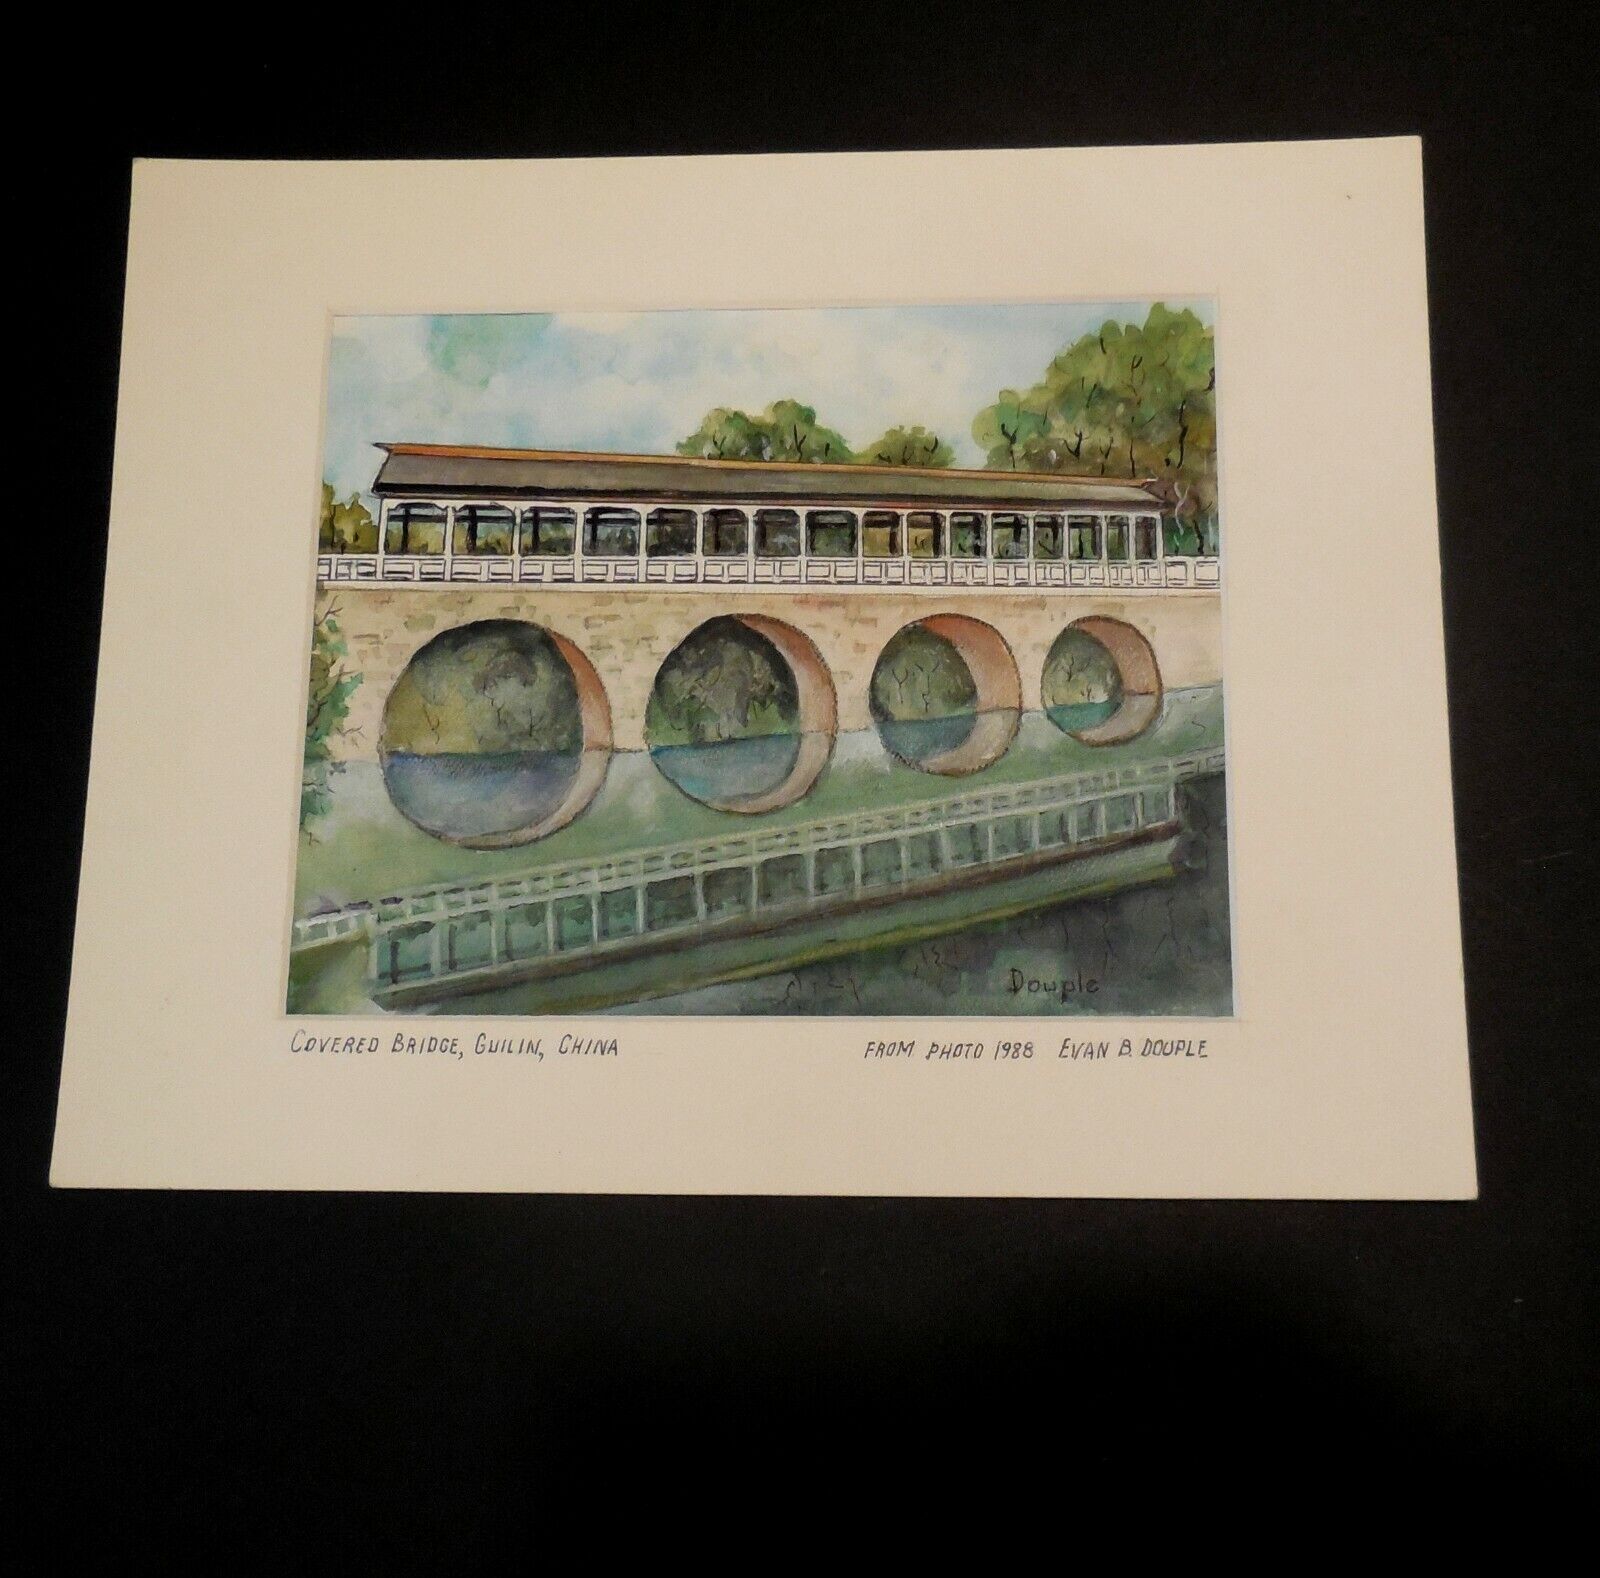 Original Water Color Painting of a Covered Bridge in China by Evan B. Douple